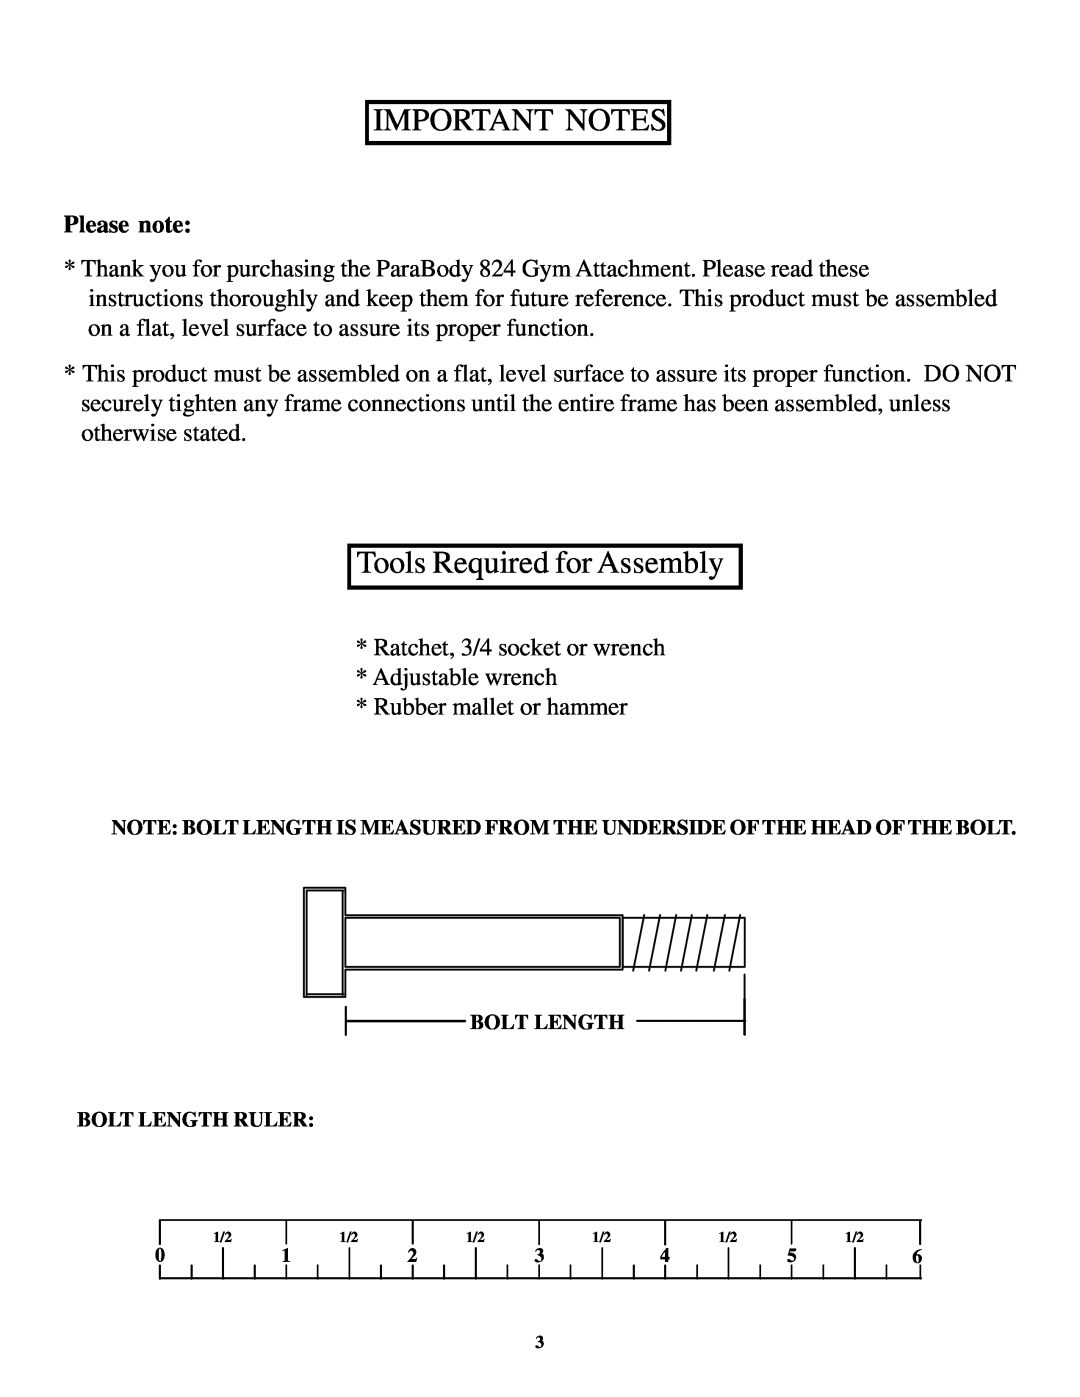 Life Fitness 824 manual Important Notes, Tools Required for Assembly, Please note 